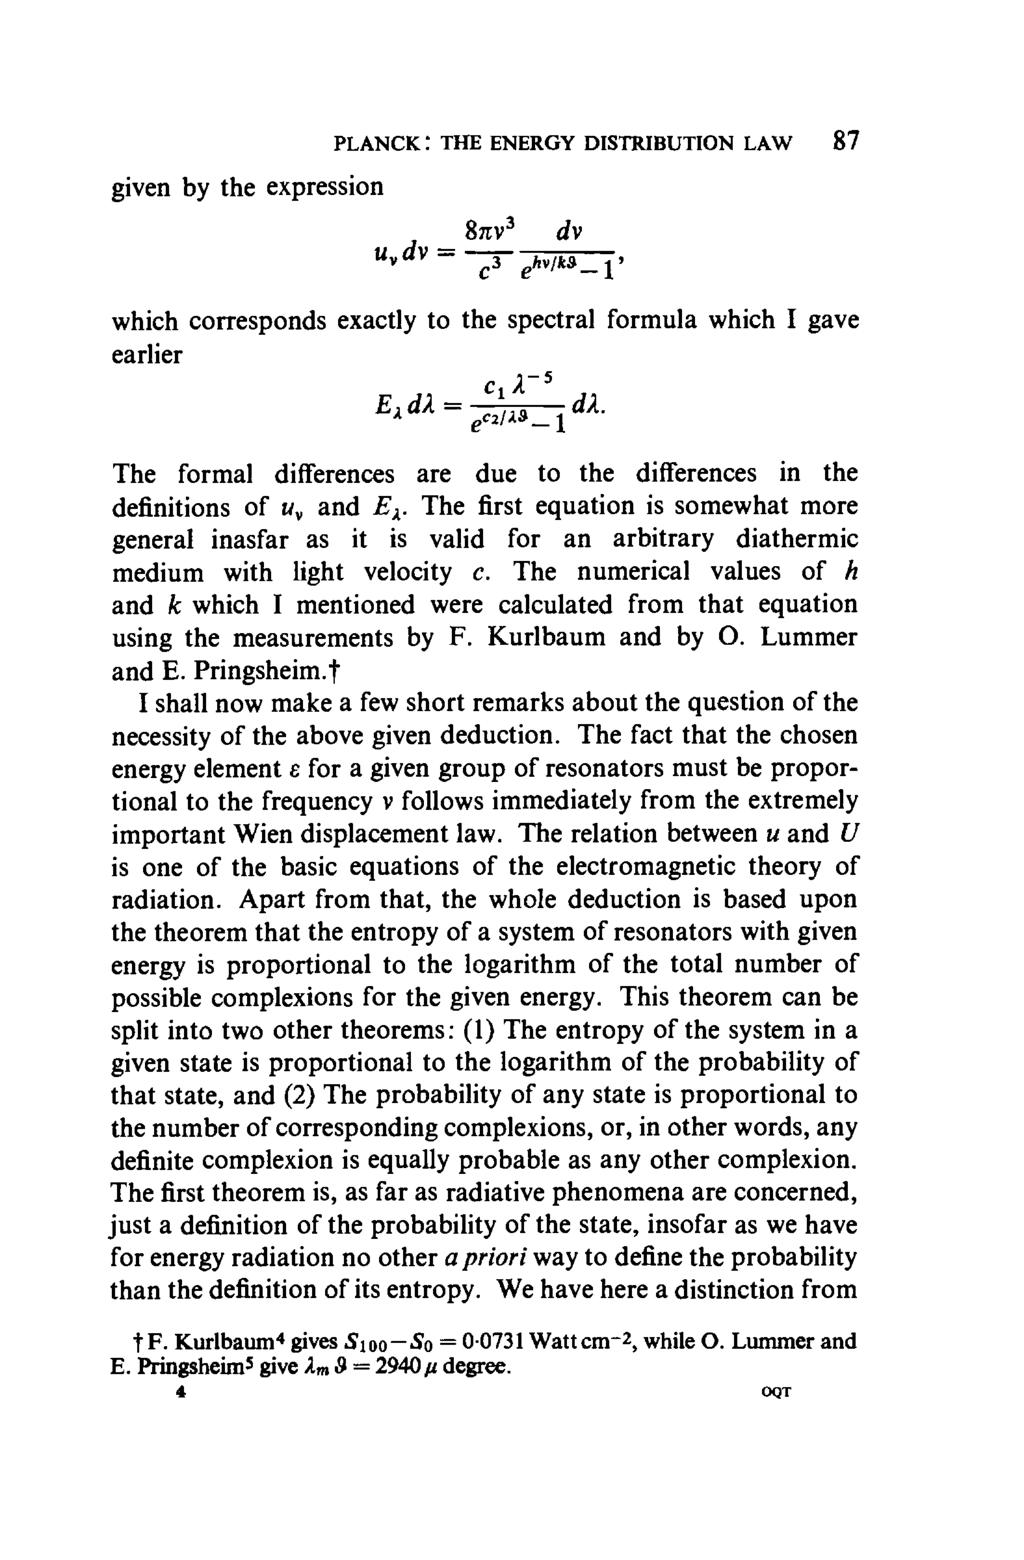 PLANCK: THE ENERGY DISTRIBUTION LAW 87 given by the expression 8πν^ dv which corresponds exactly to the spectral formula which I gave earlier The formal differences are due to the differences in the